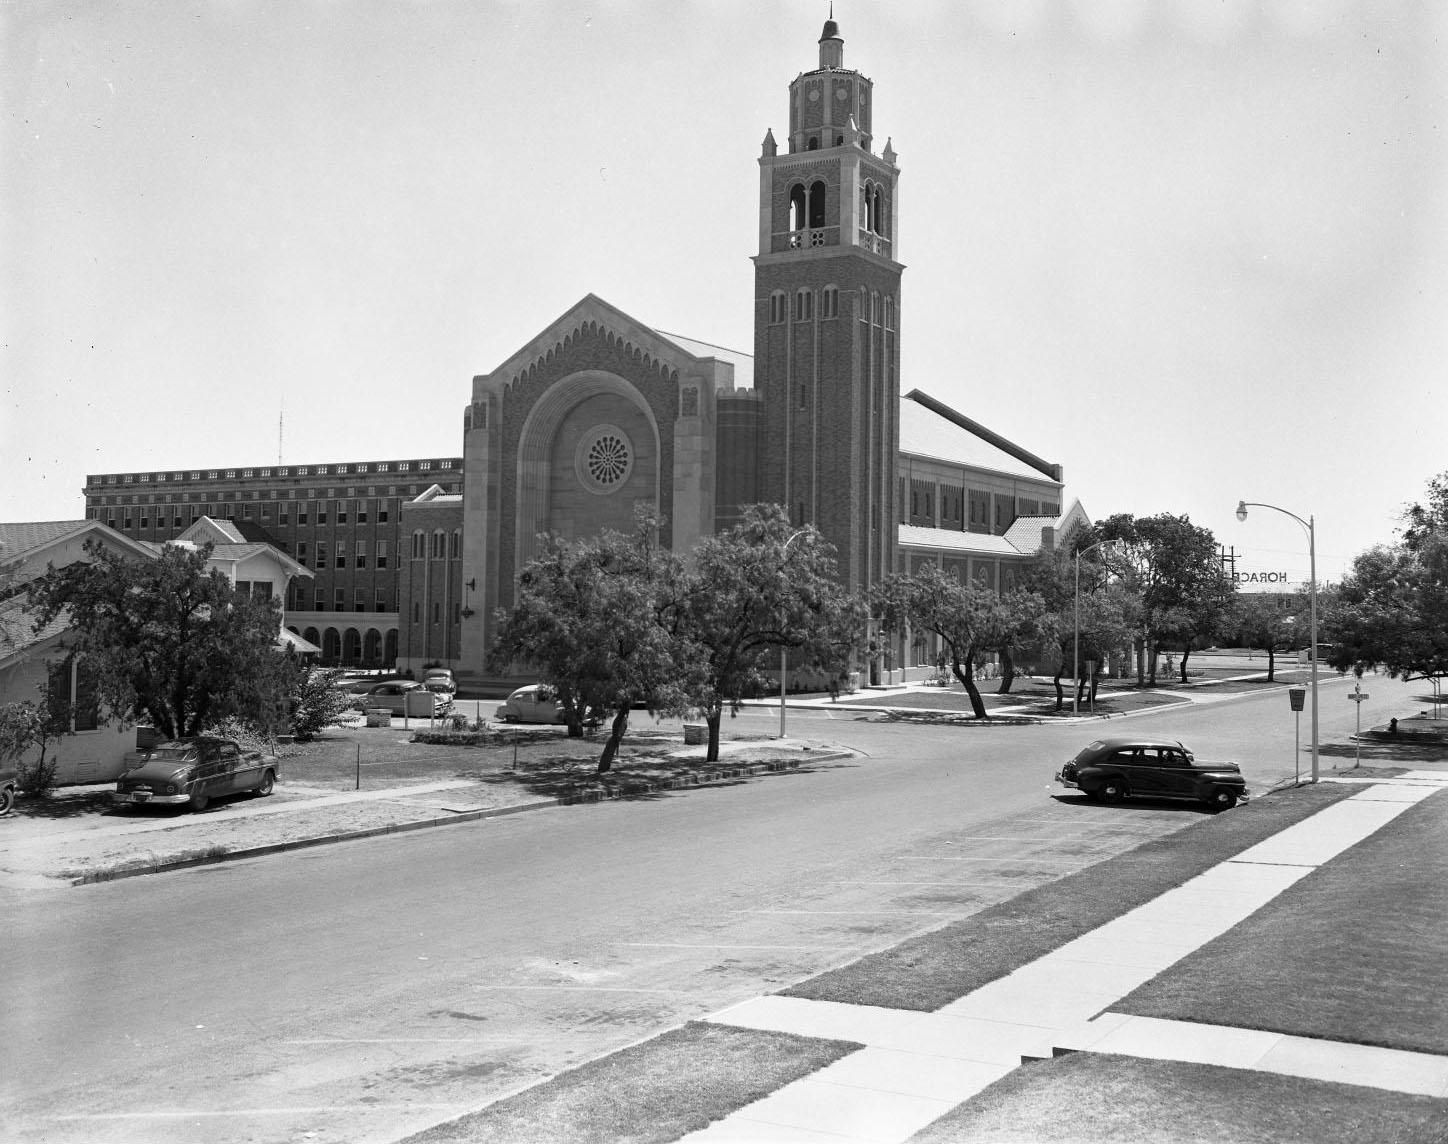 Exterior view of First Baptist Church in Abilene, 1958. The church has Gothic style architecture and a large bell tower. There are cars parked in the street outside the church.